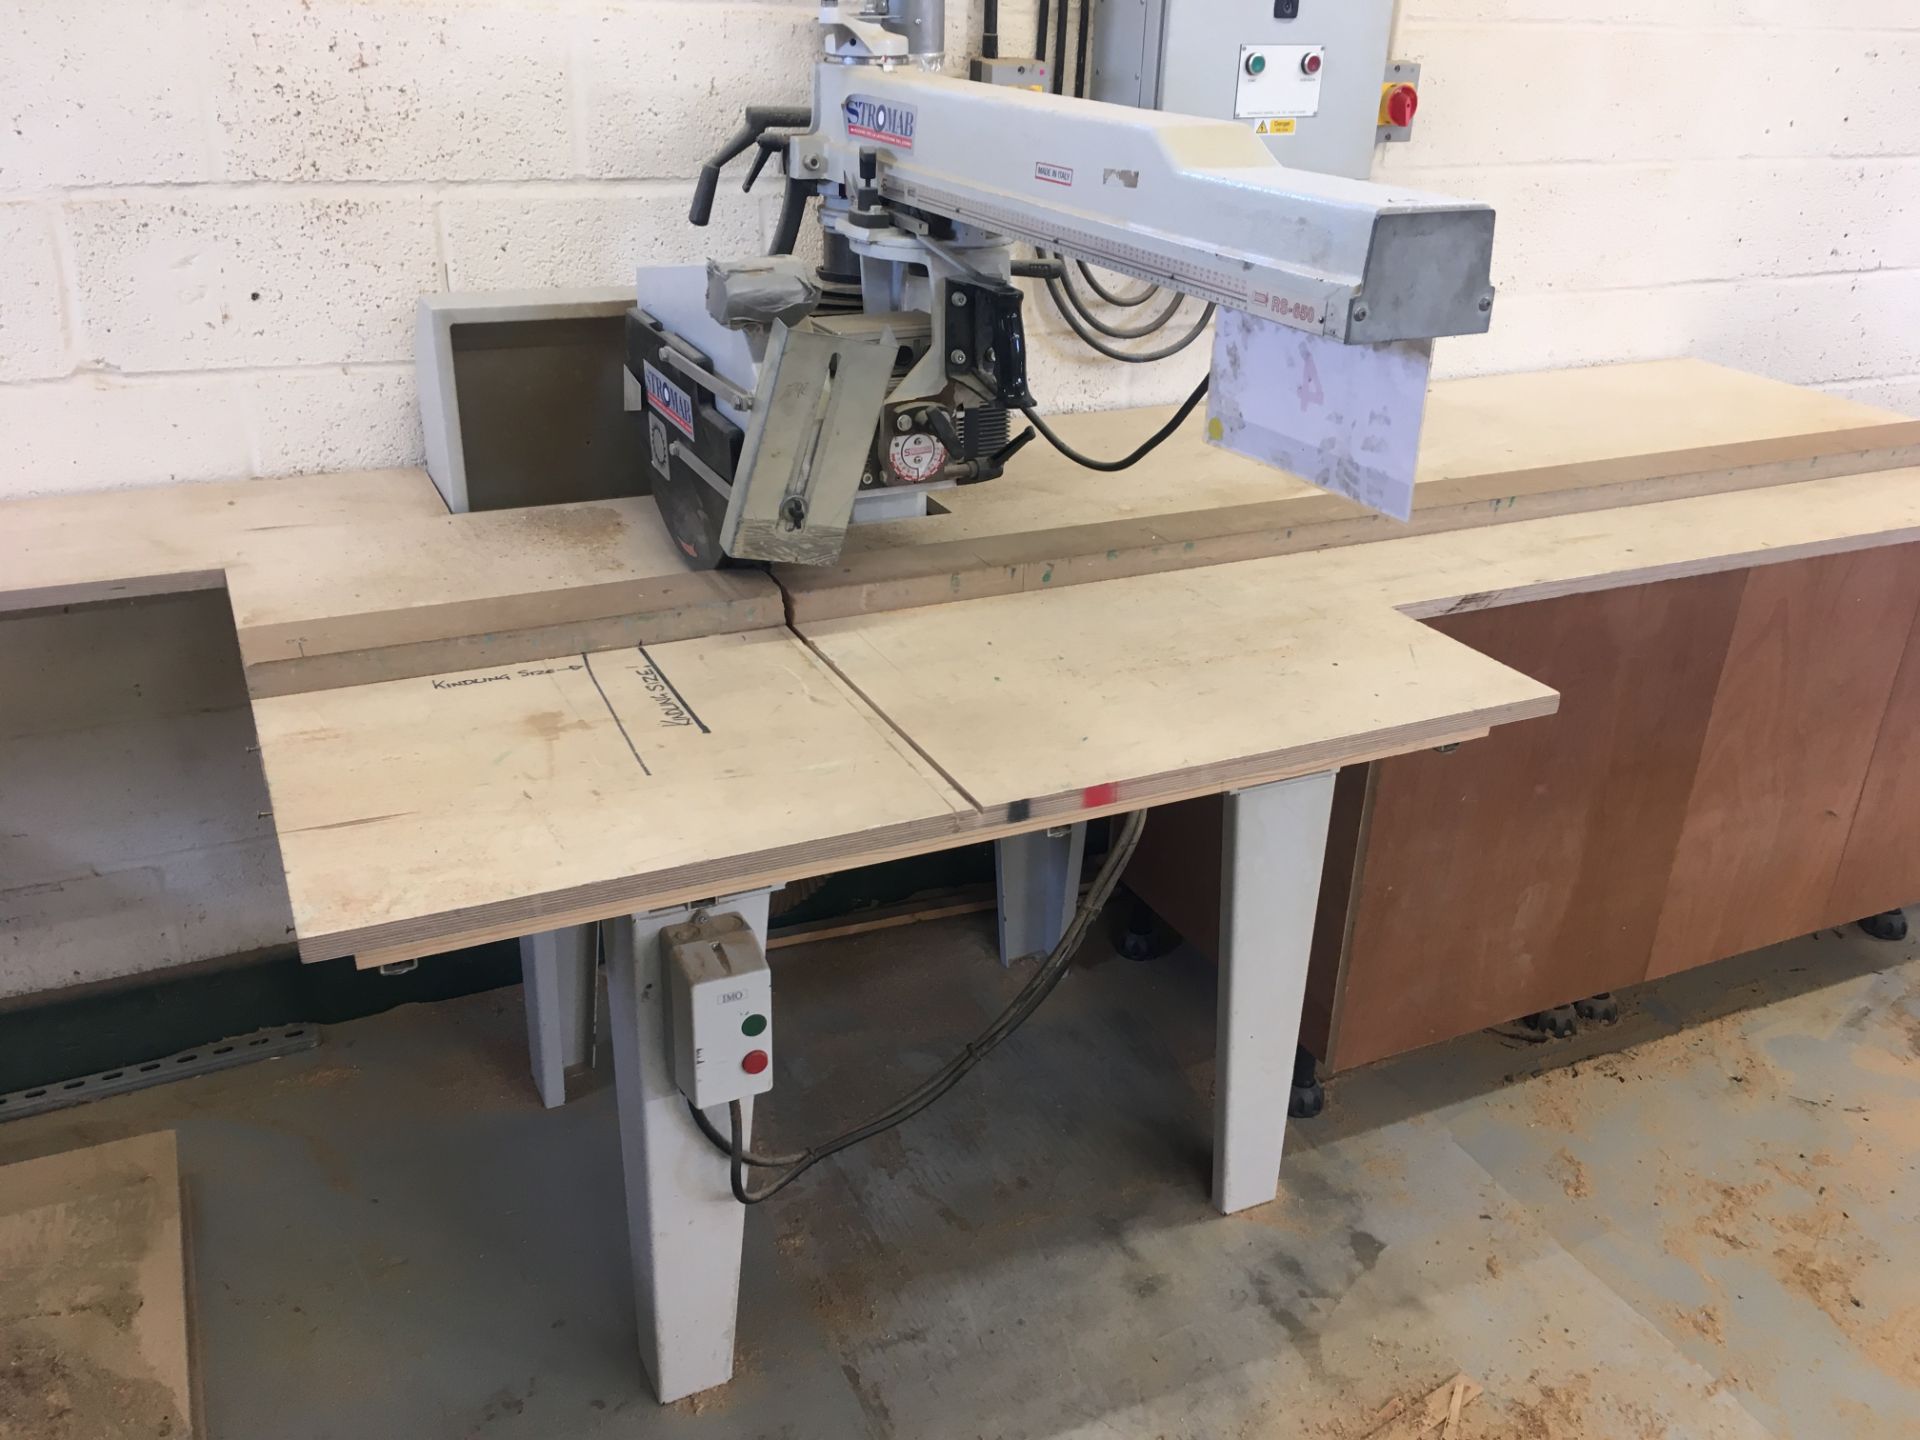 Stromab RS-650 radial arm saw, NB: A work Method Statement and Risk Assessment must be reviewed and - Image 2 of 6